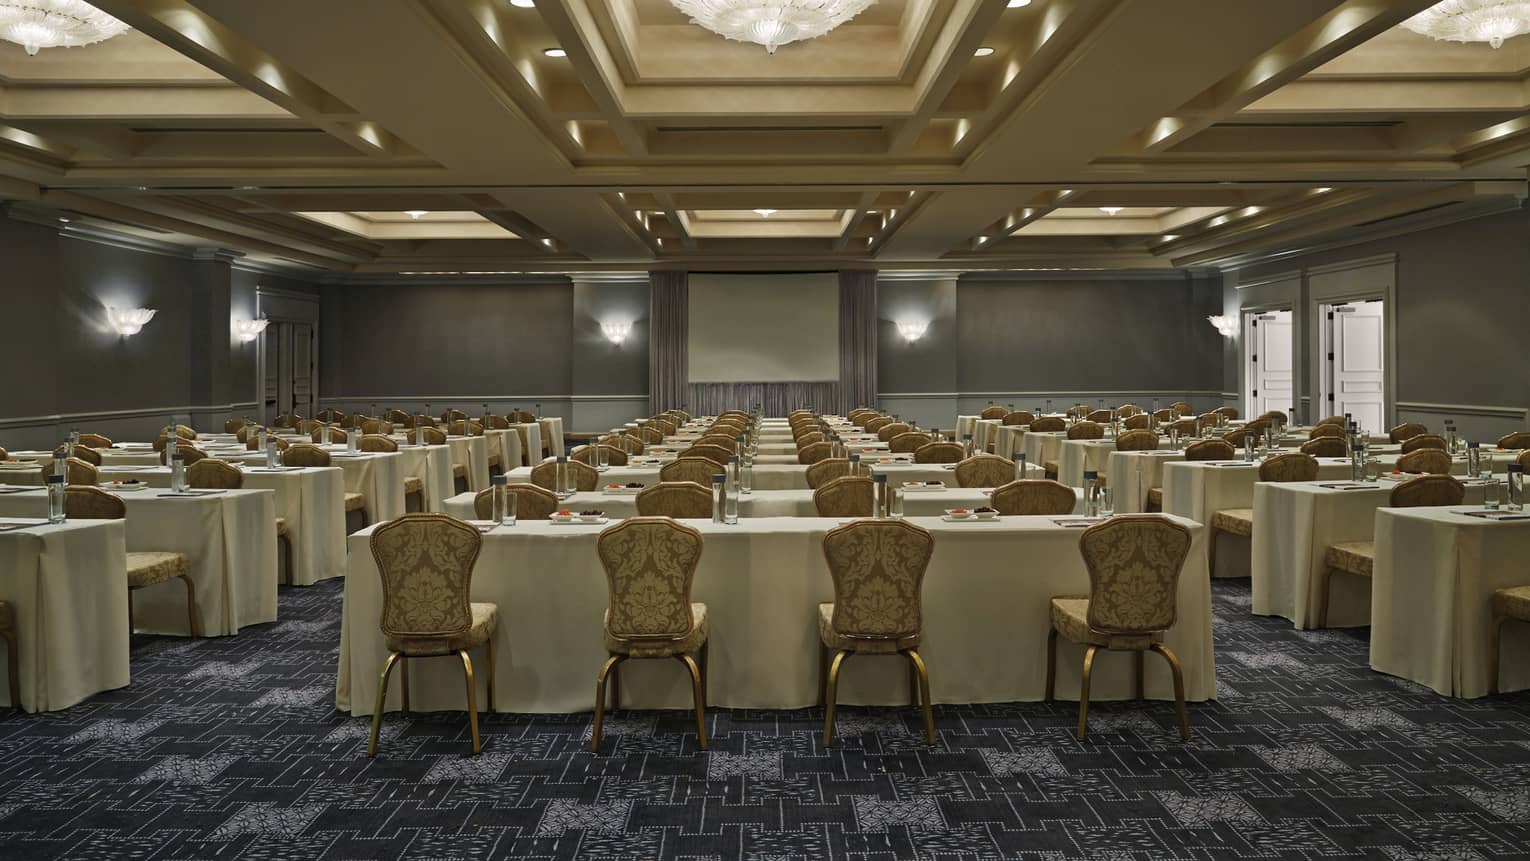 Flagler Ballroom conference with rows of meeting tables and chairs facing screen